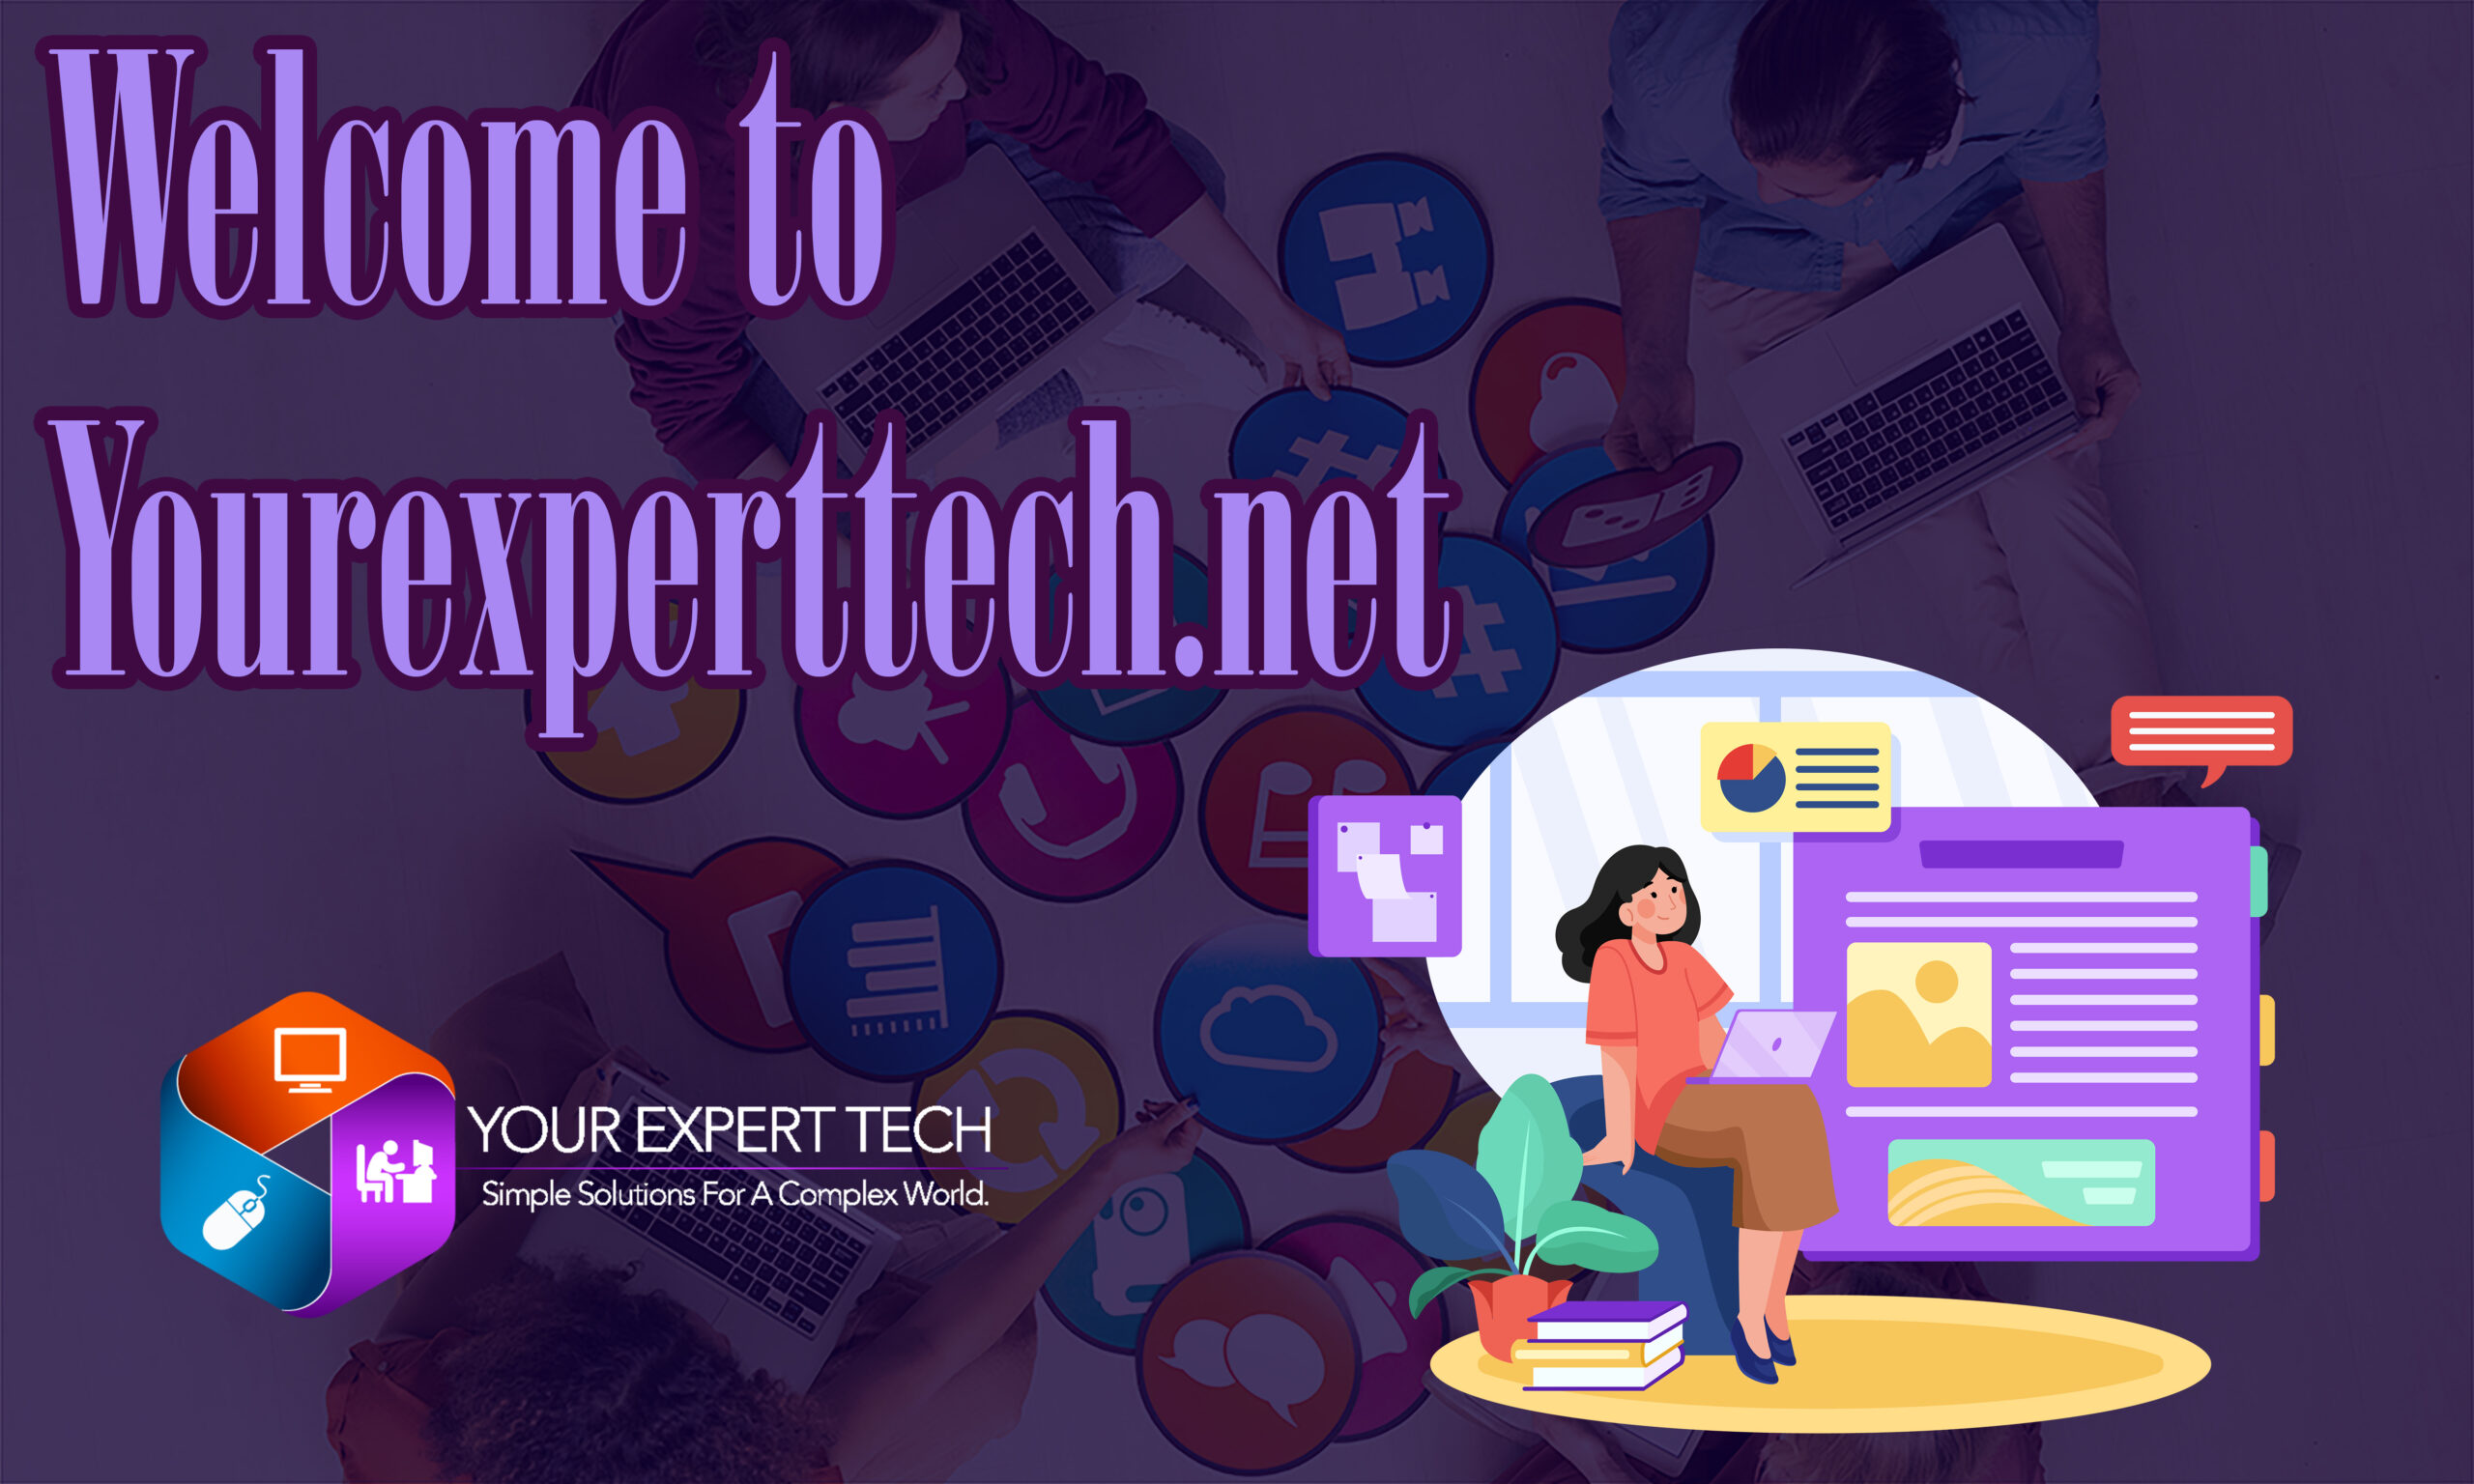 Title image for the blog post Welcome to Your Expert Tech Inc